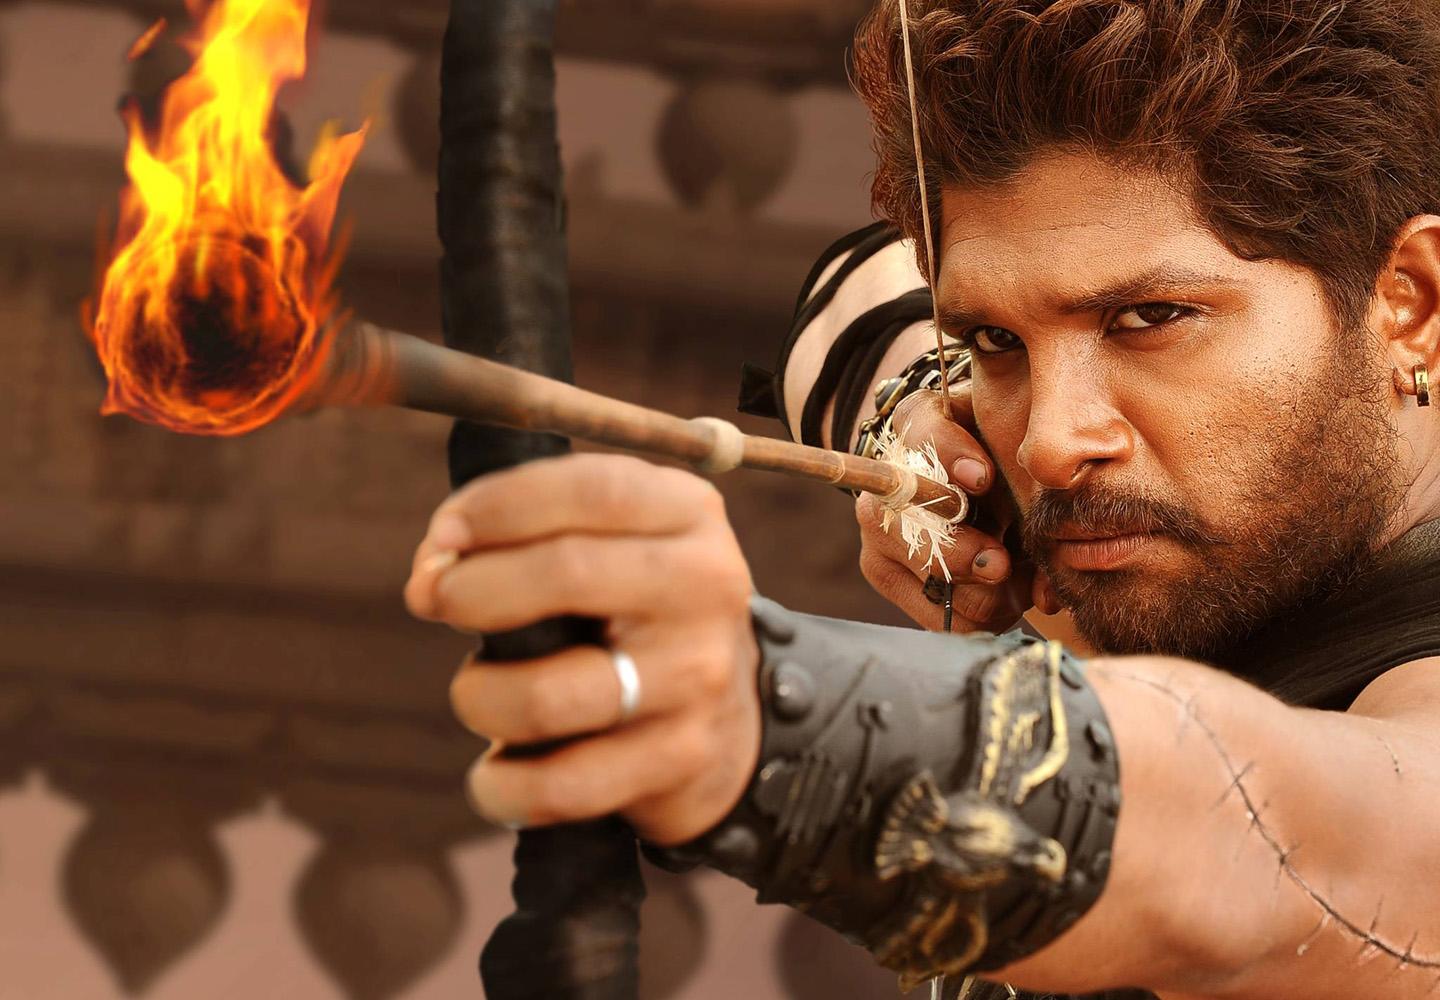 Rudhramadevi Picture Gallery